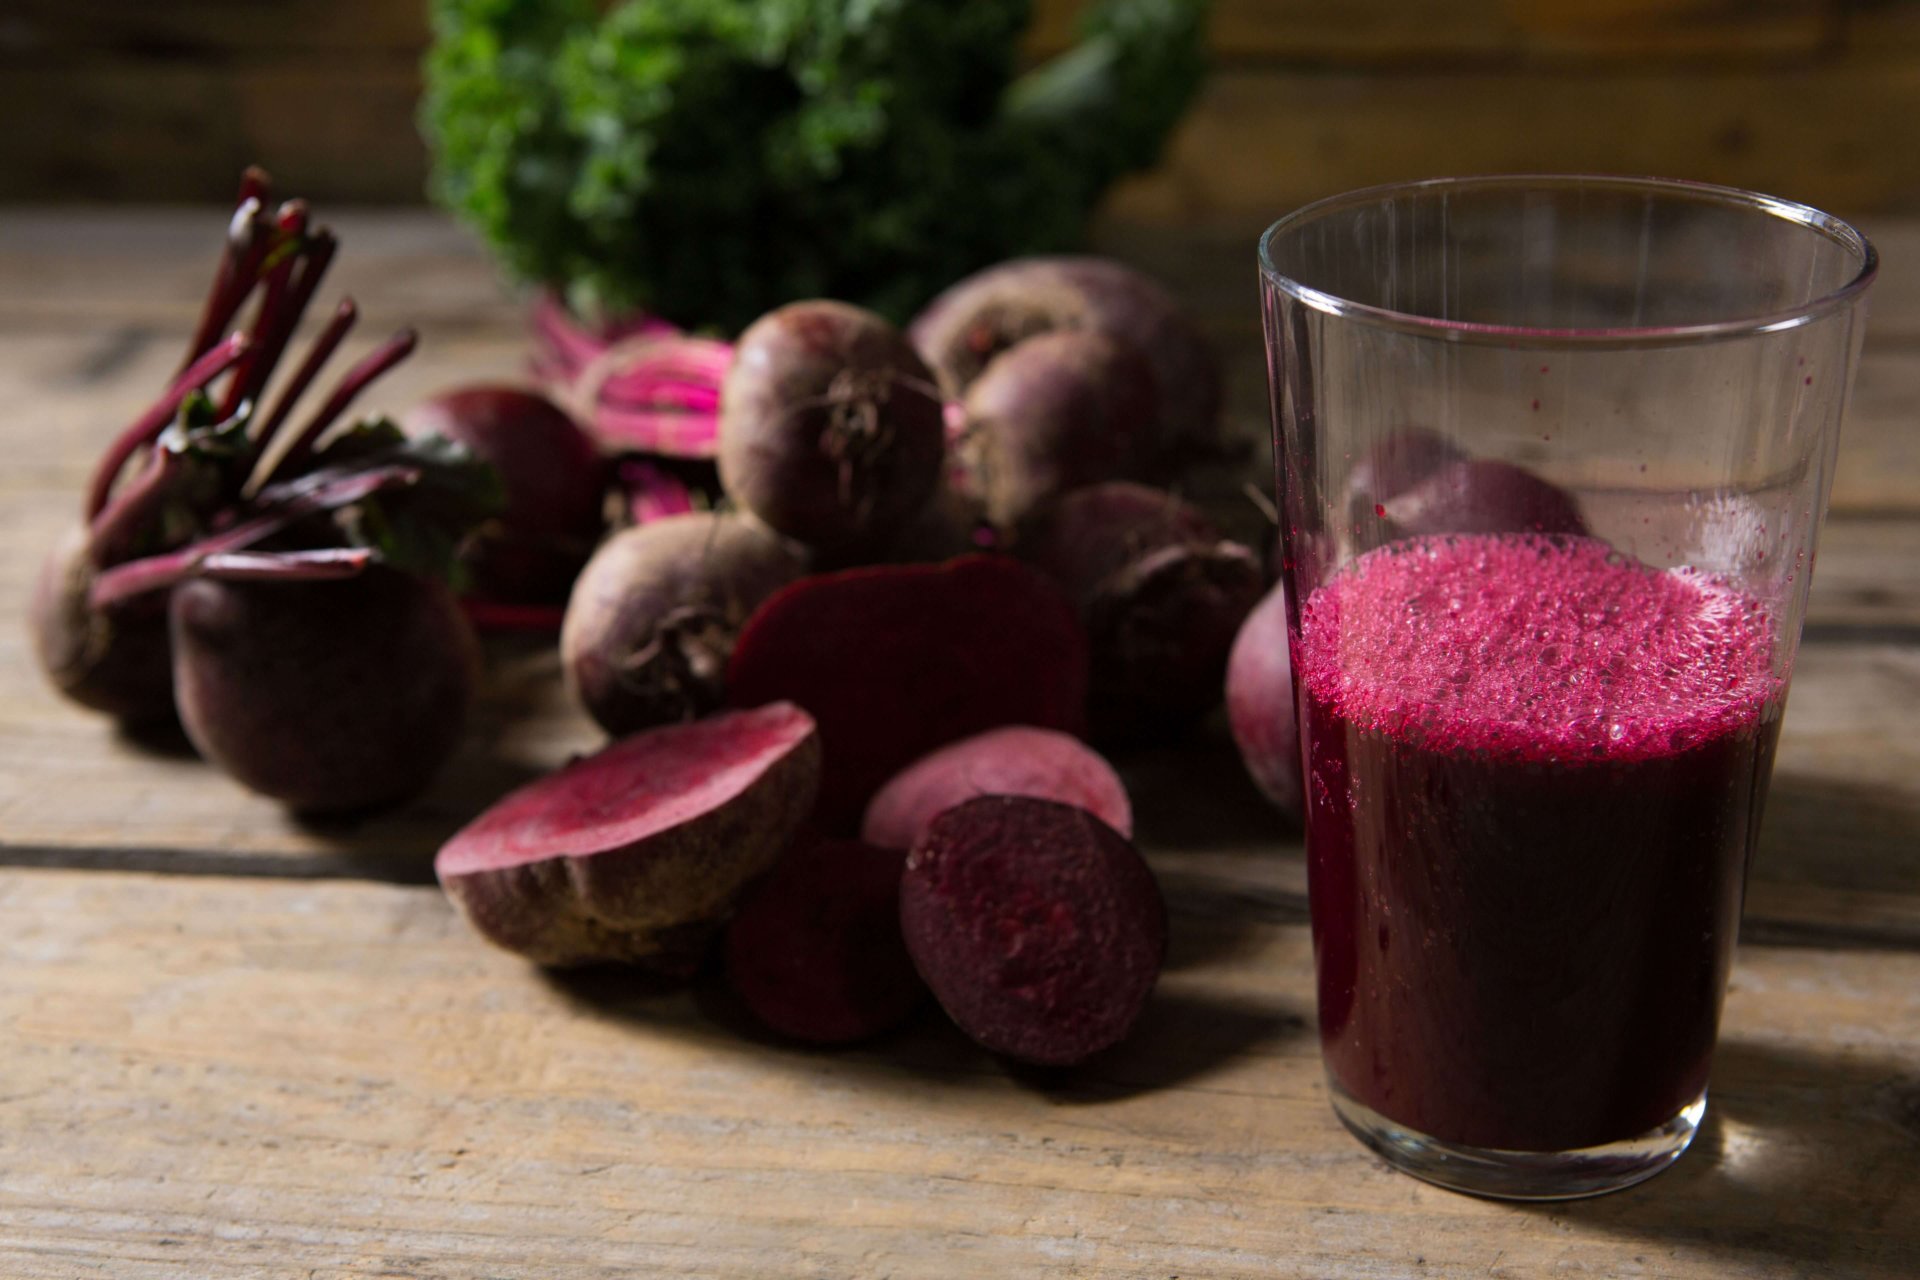 beet and kale superfood smoothie for detox